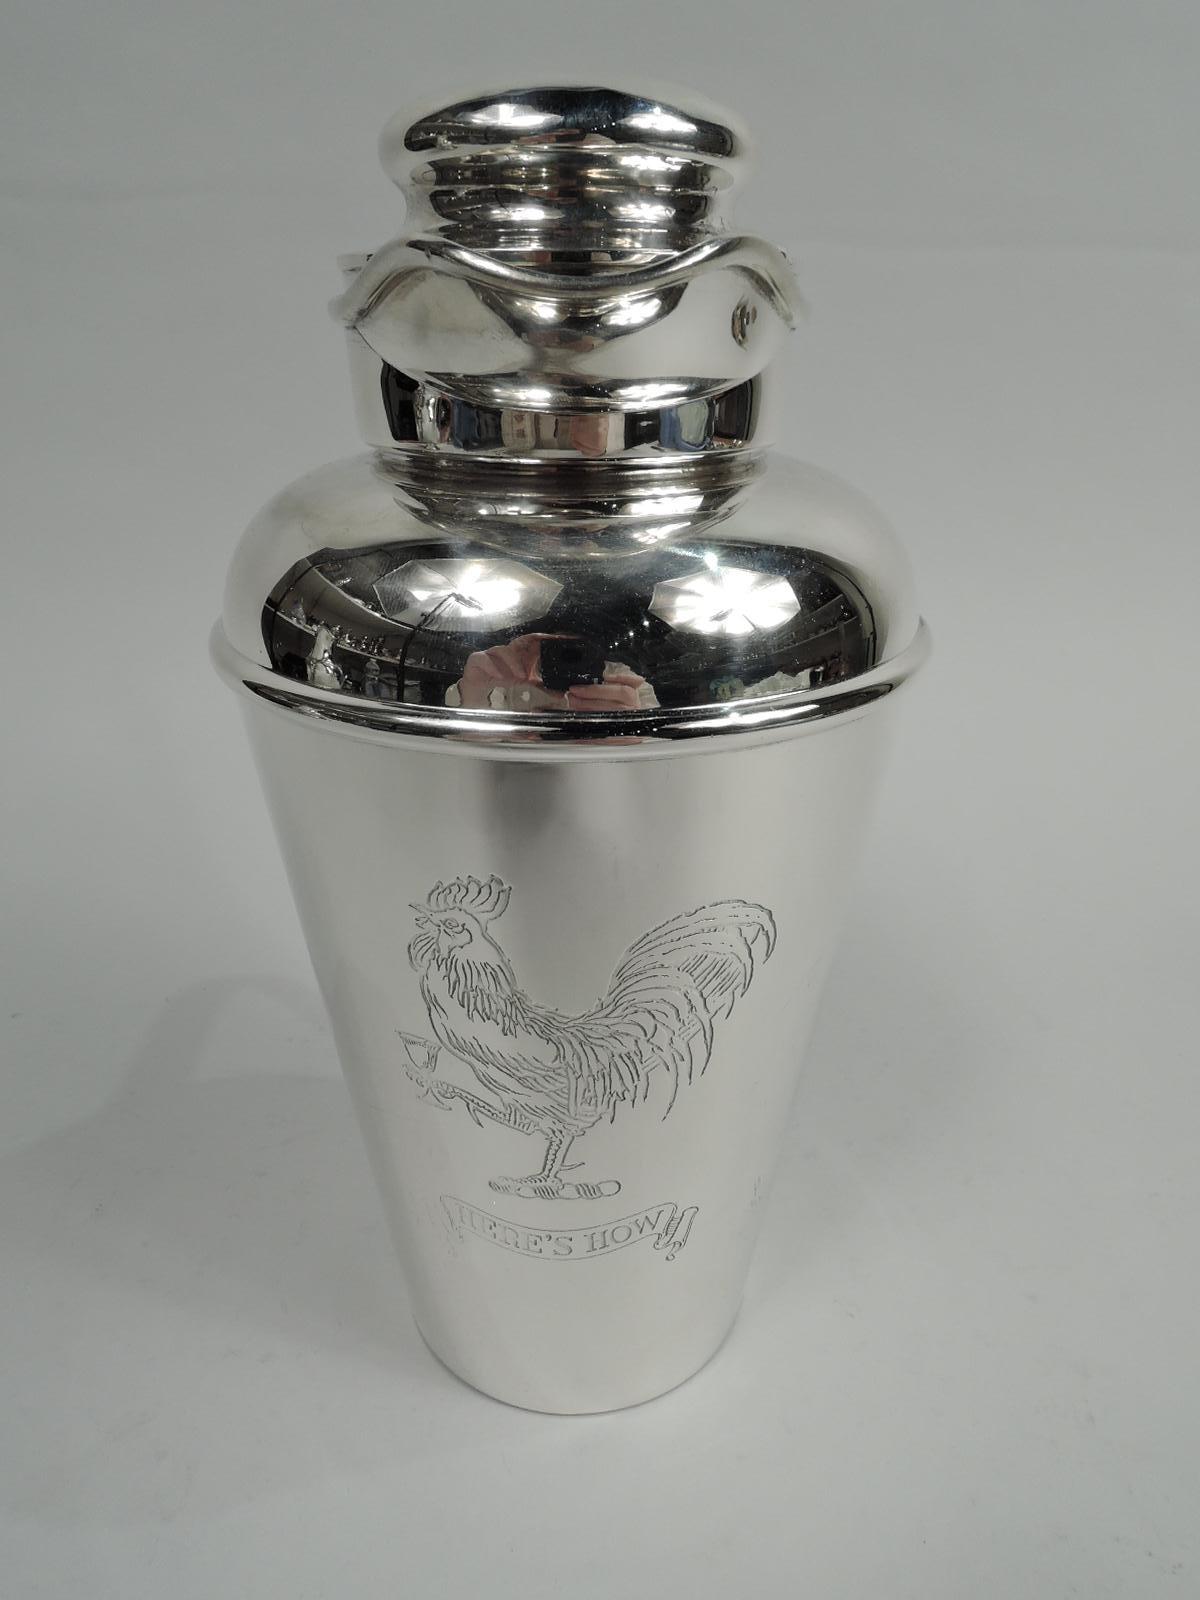 Prohibition-era sterling silver cocktail shaker. Made by Gorham in Providence in 1925. Tapering bowl, curved shoulder, short neck, scroll bracket handle, and helmet-mouth with snug-fitting bun cover and built-in strainer. On front is engraved